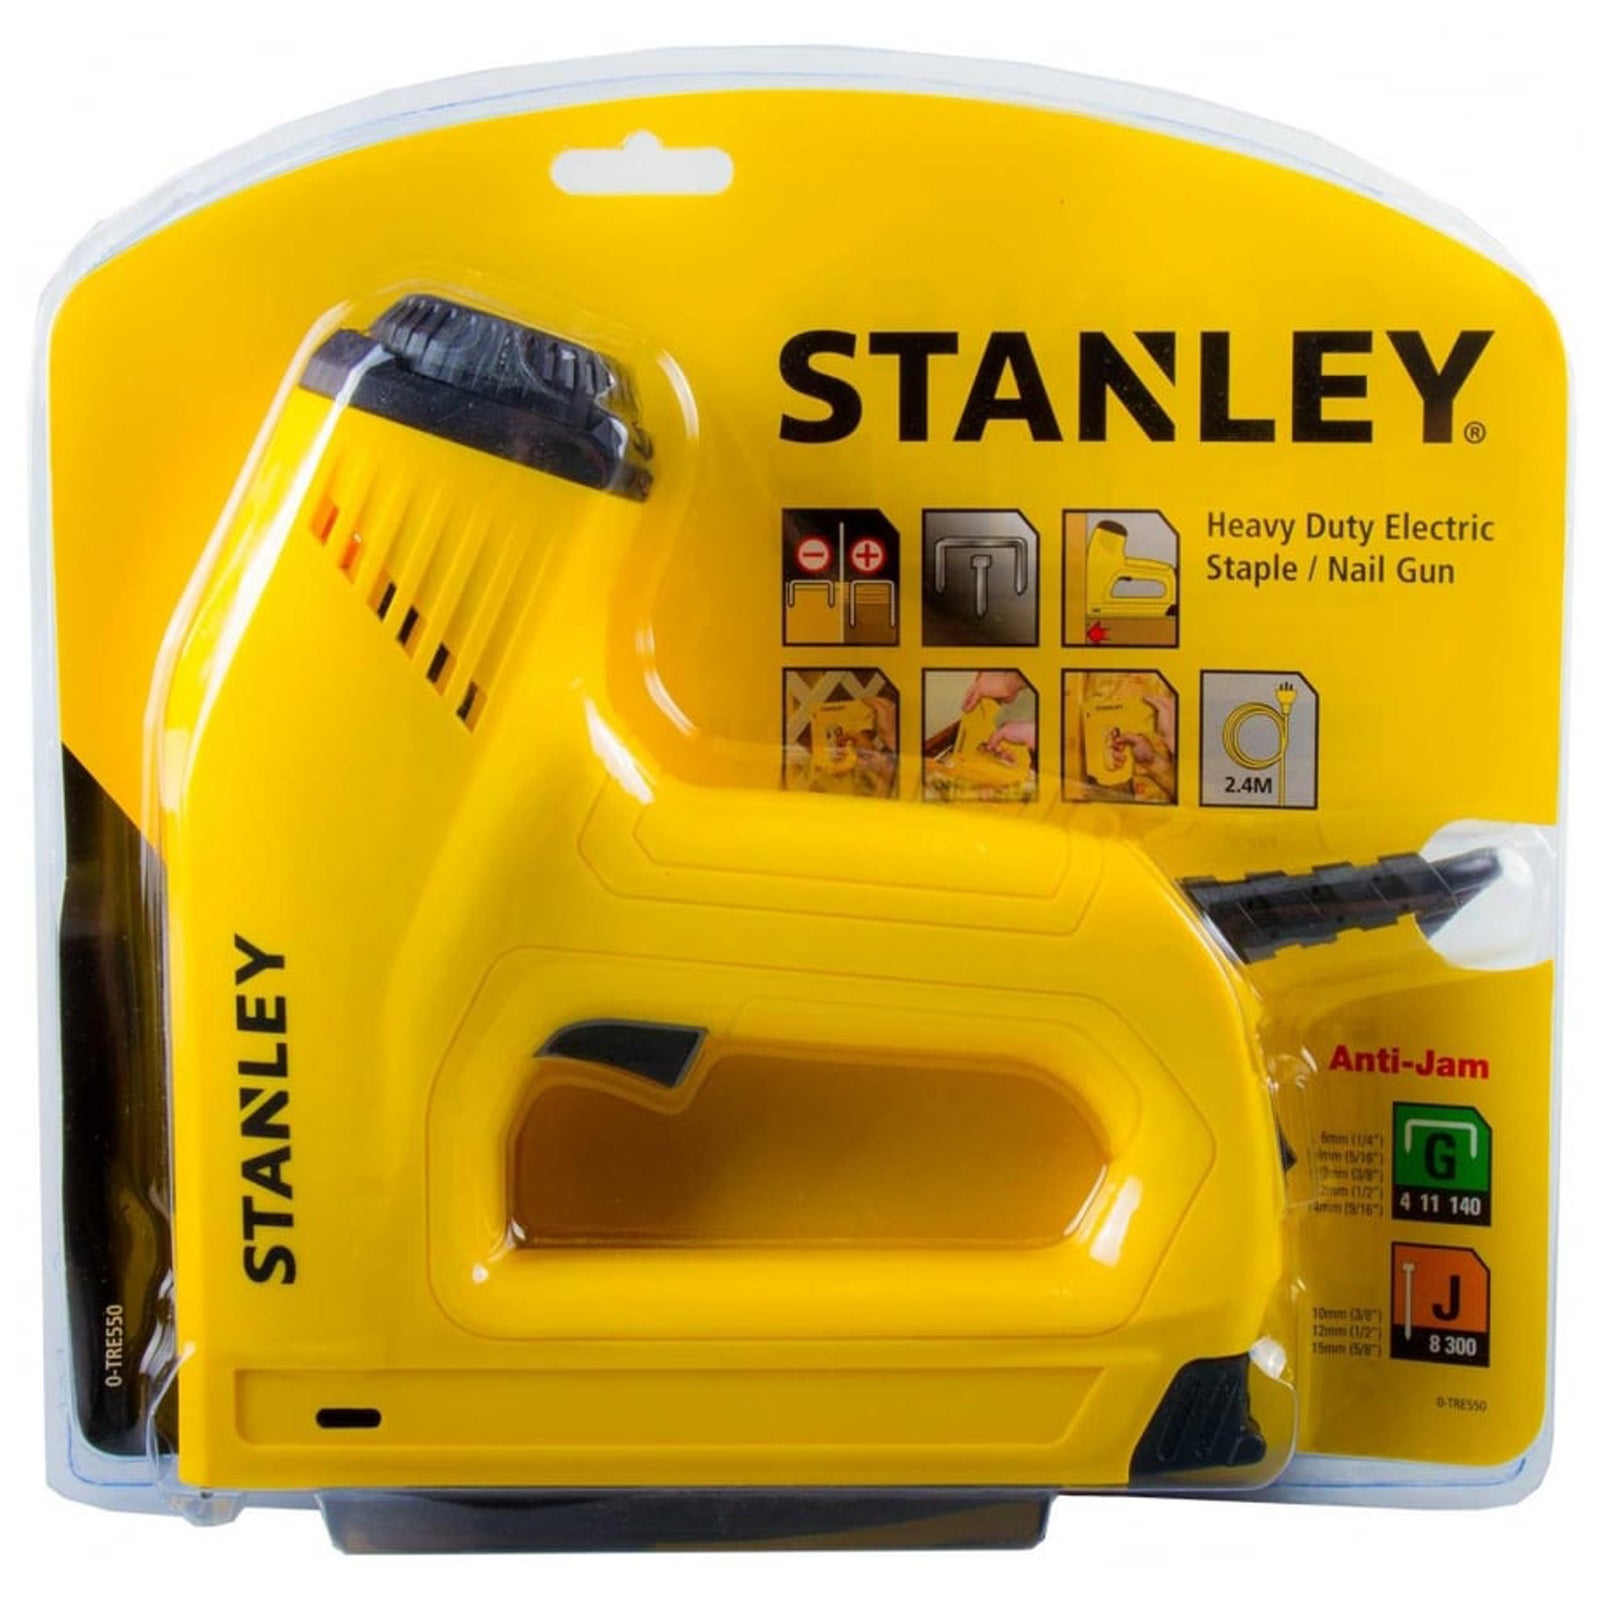 Stanley Electric and Heavy Gun Nail Staple Duty